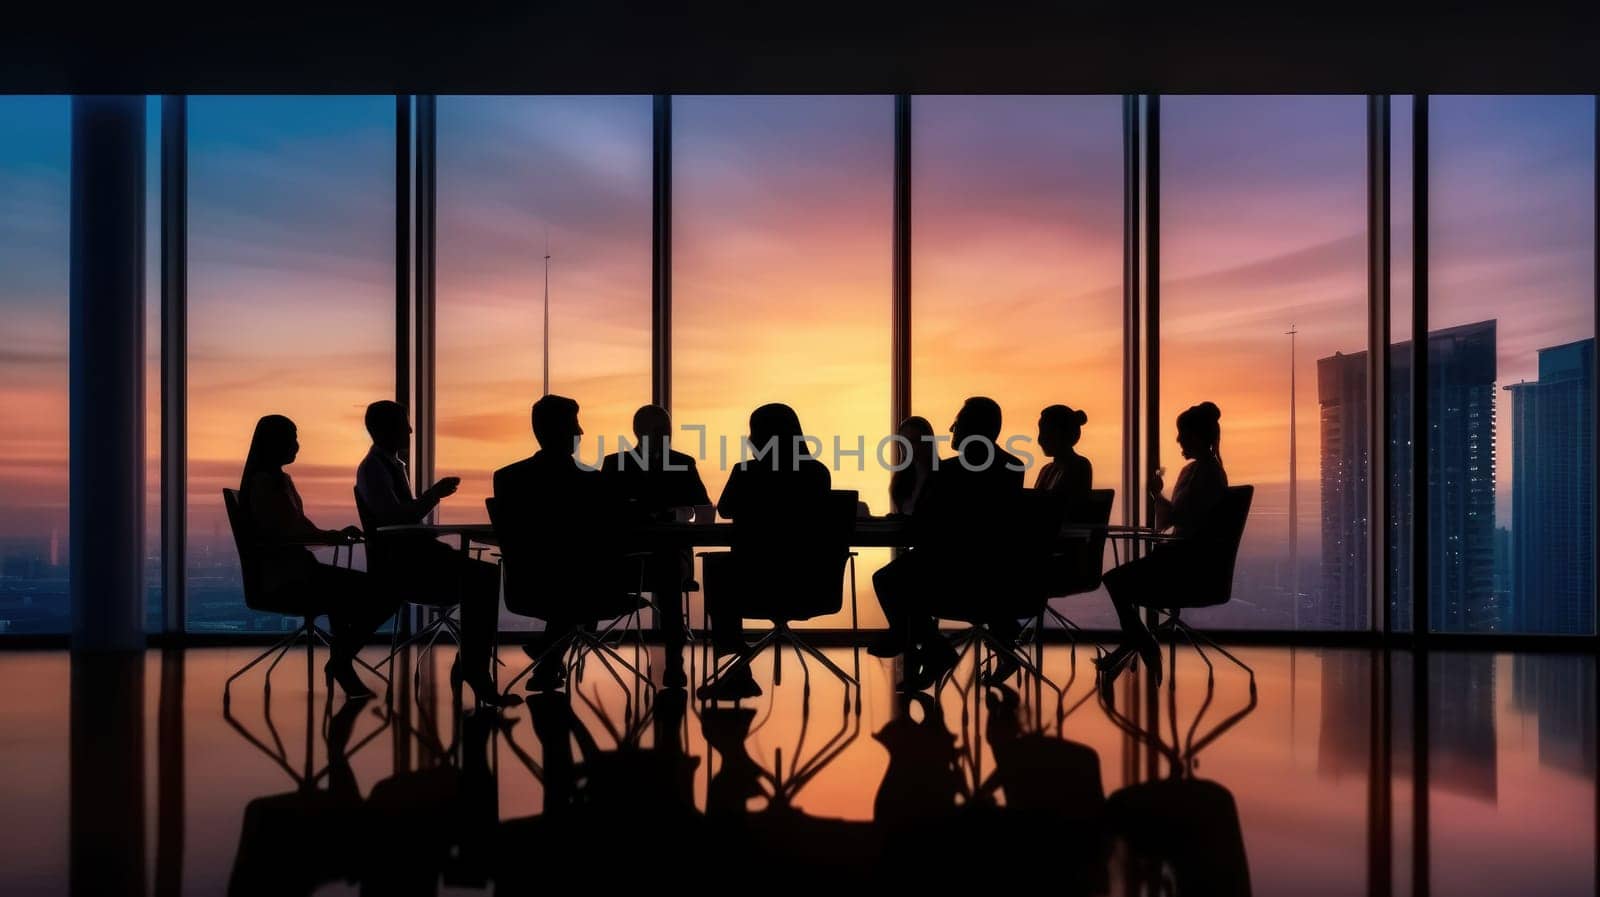 Silhouettes of group of business people in sunset comeliness by biancoblue